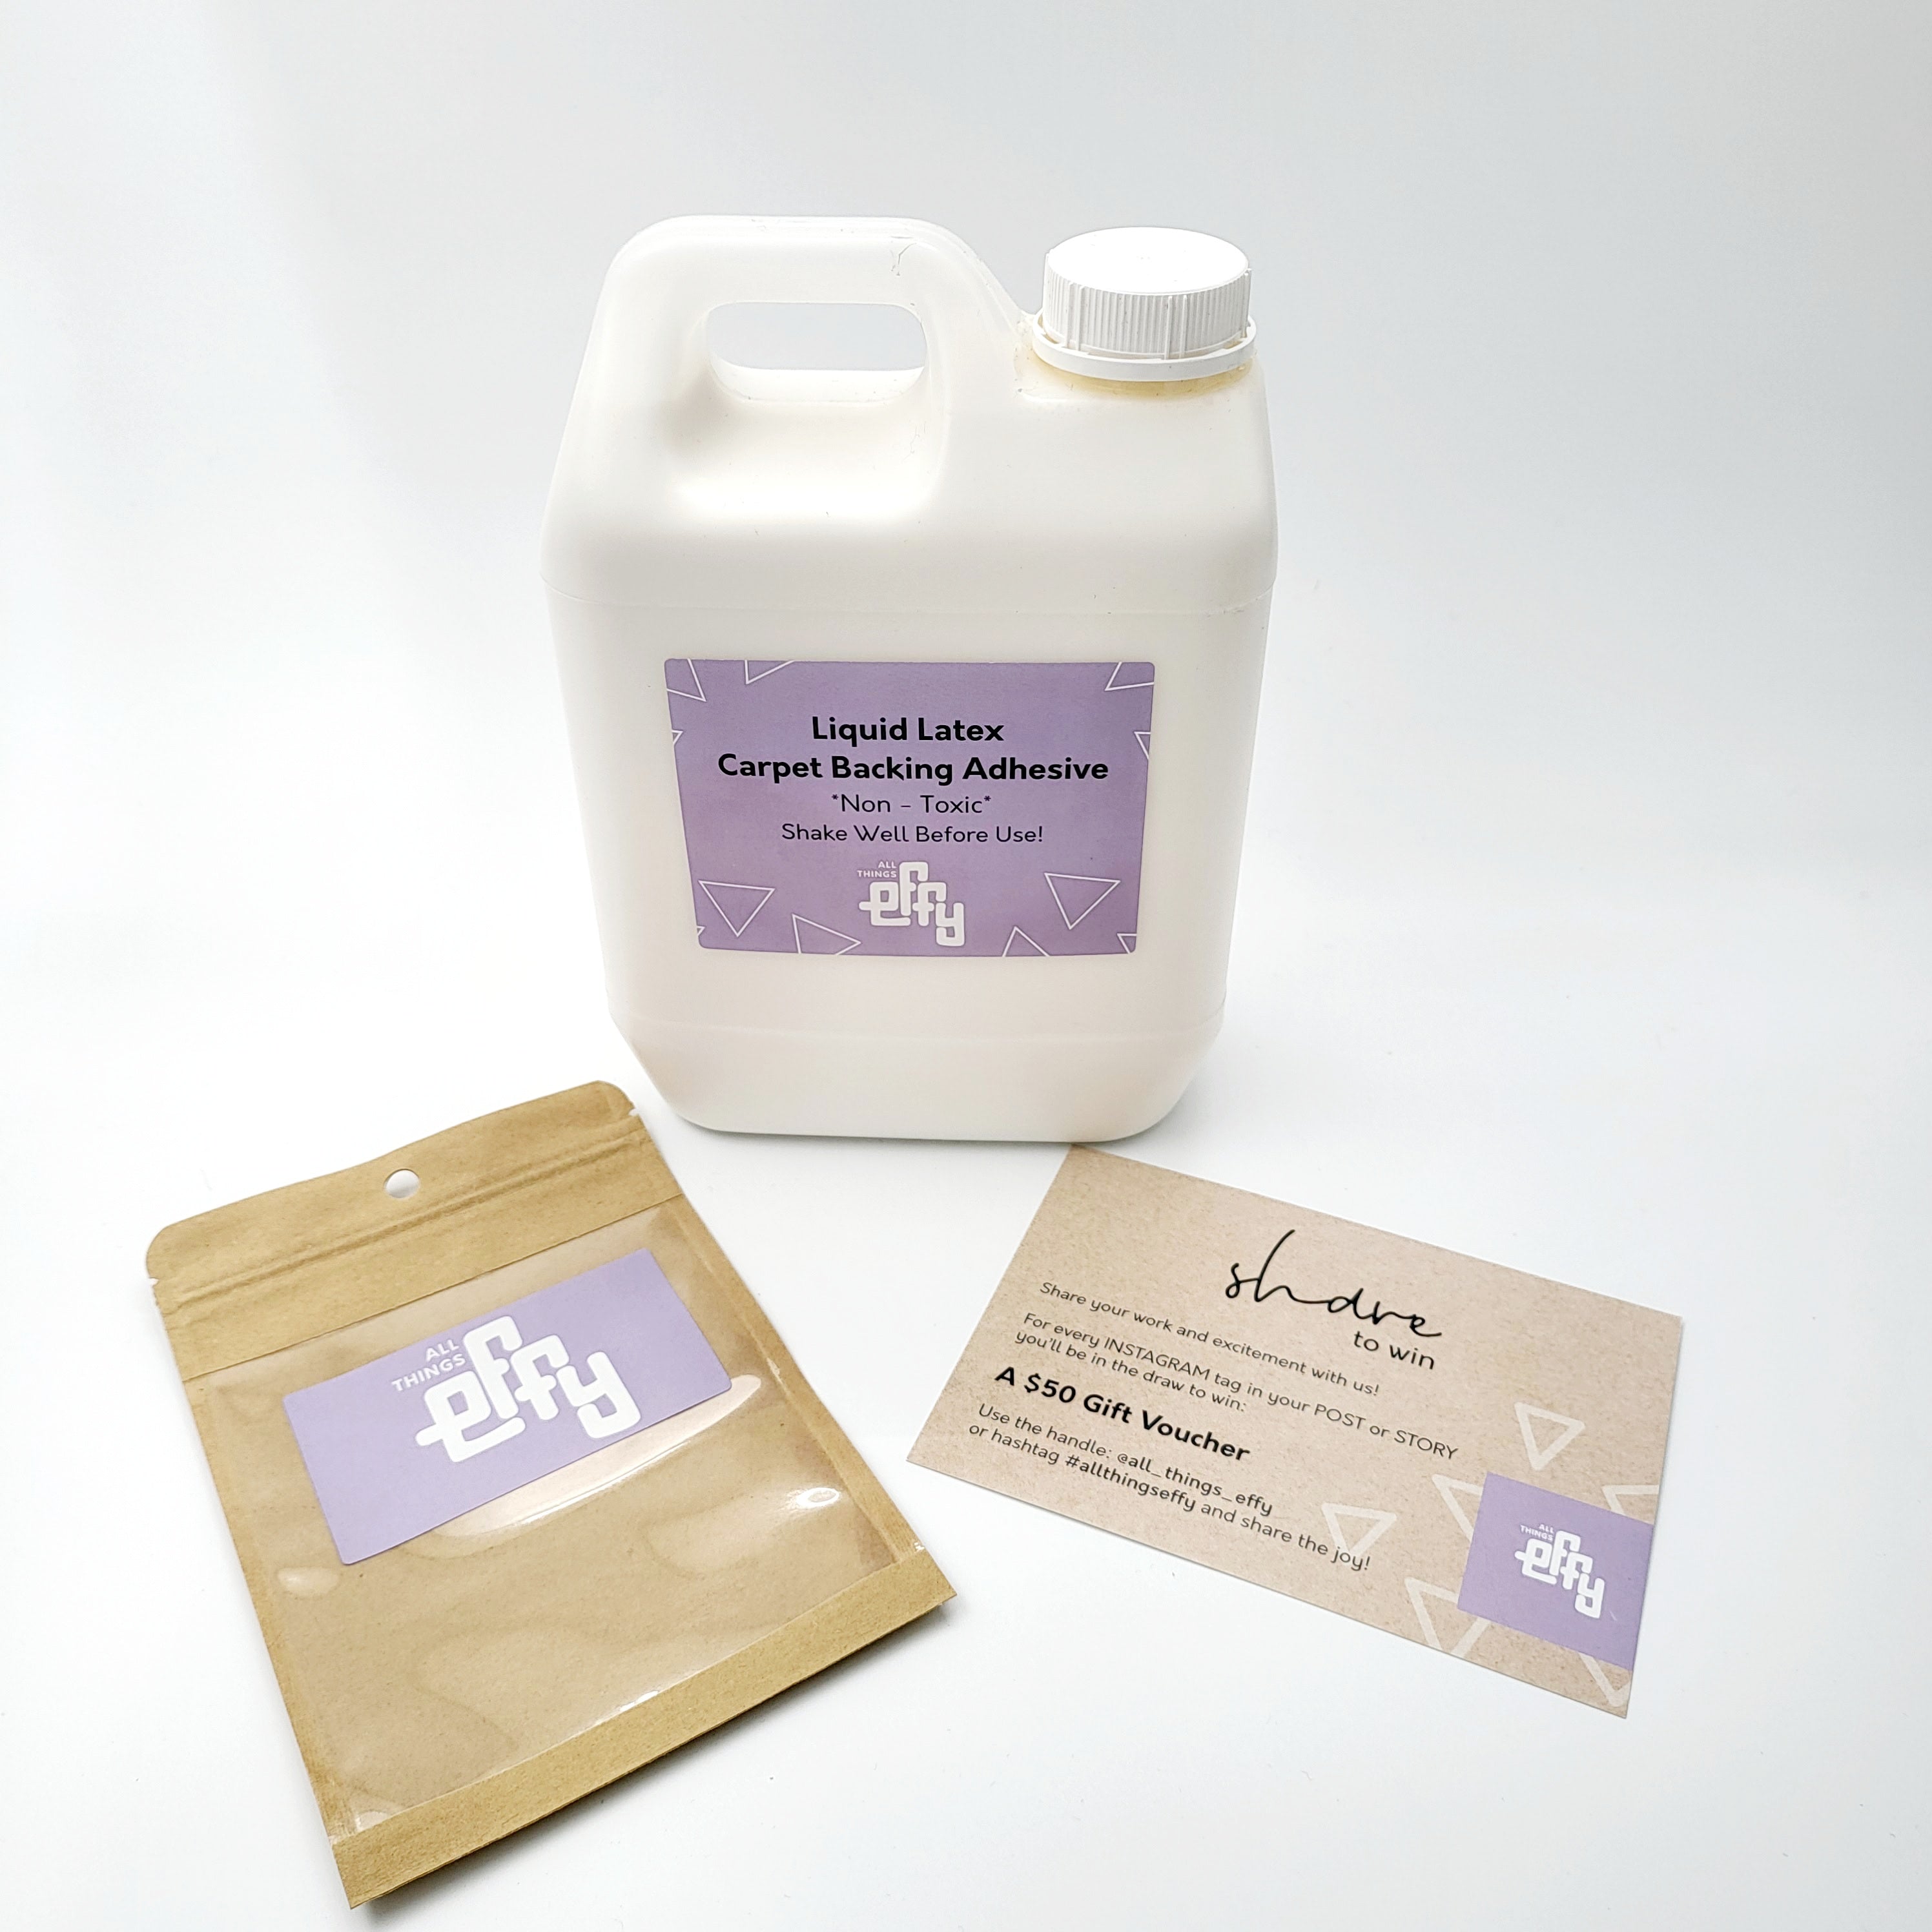 LATEX Adhesive for backing rugs! *Now shipping Worldwide!!* - All